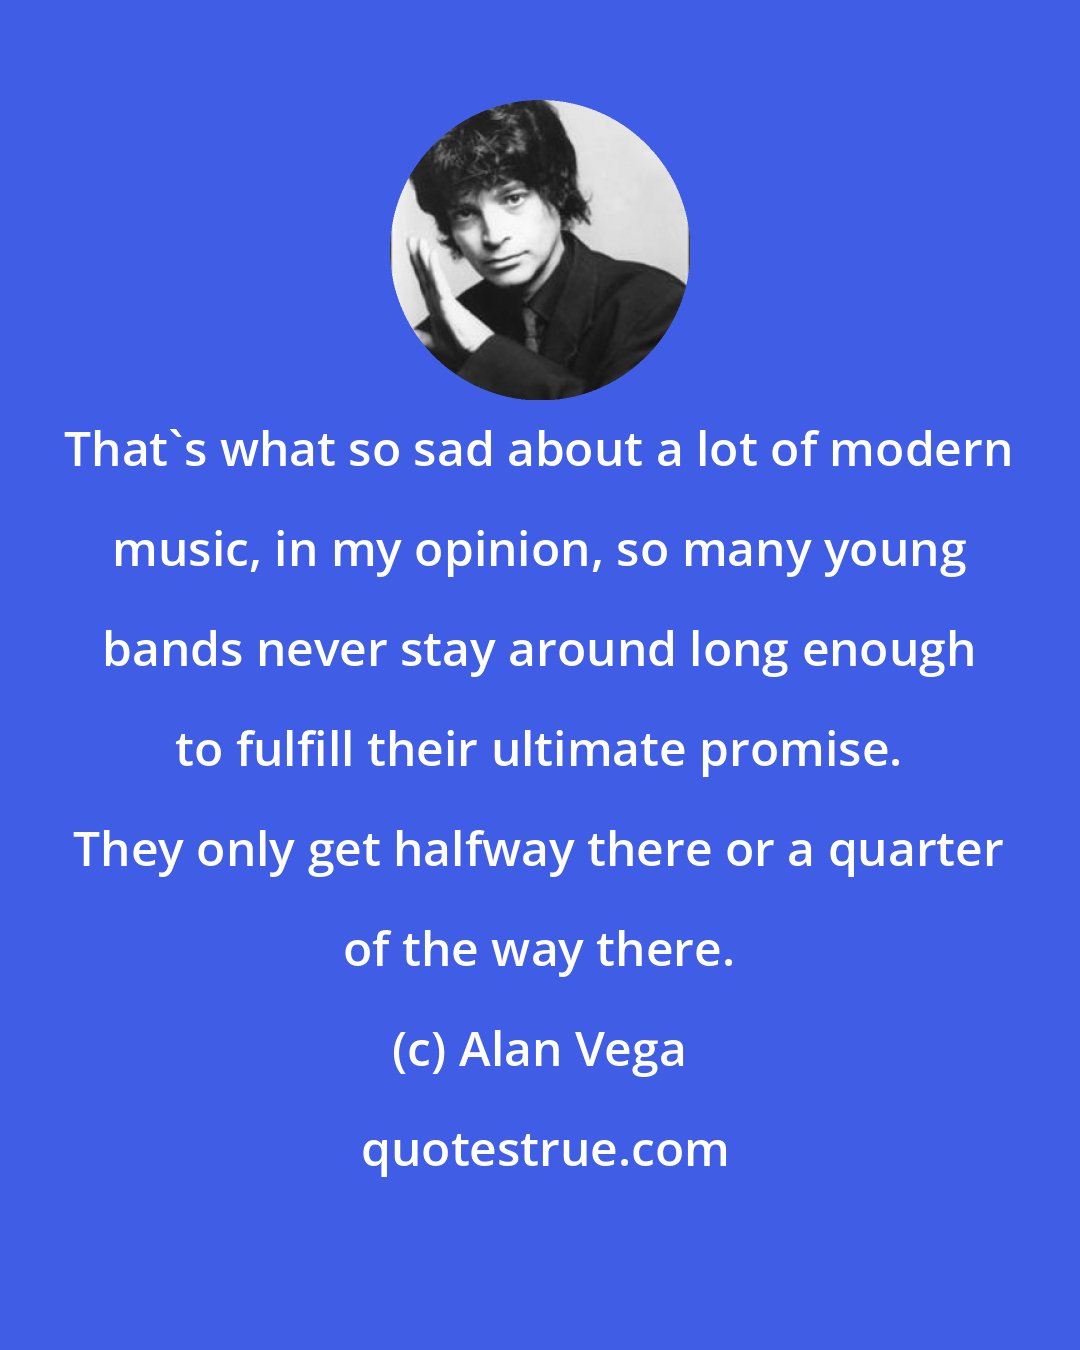 Alan Vega: That's what so sad about a lot of modern music, in my opinion, so many young bands never stay around long enough to fulfill their ultimate promise. They only get halfway there or a quarter of the way there.